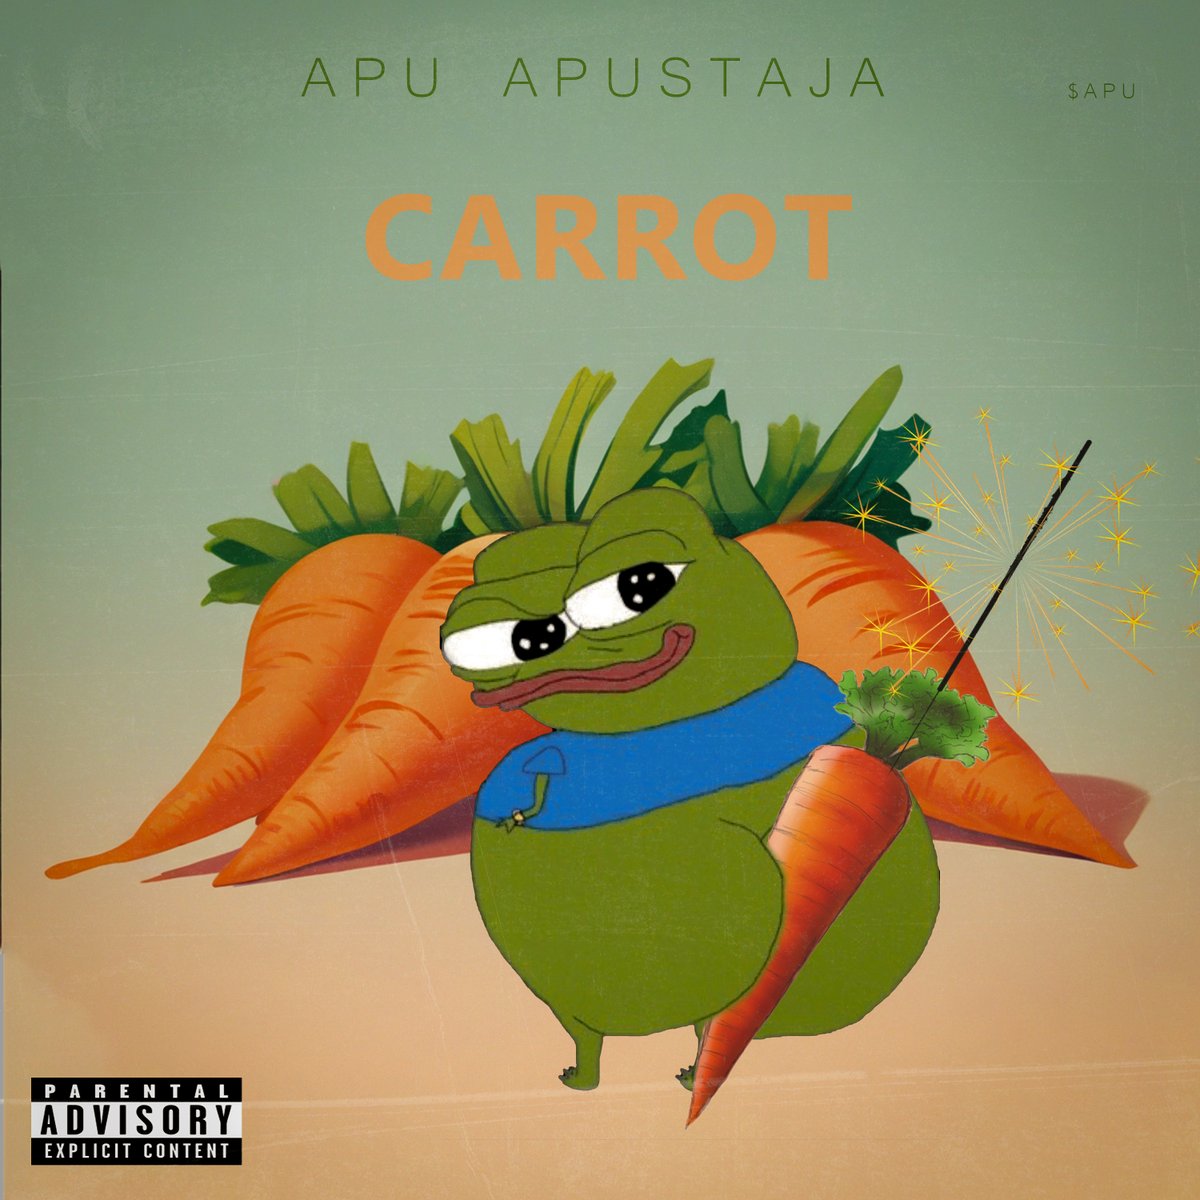 My album cover design for the Carrot song of @ApusCoin $apu. It's been a while since I did some photoshop magic, I really had tons of fun making this! #ApuAlbumContest